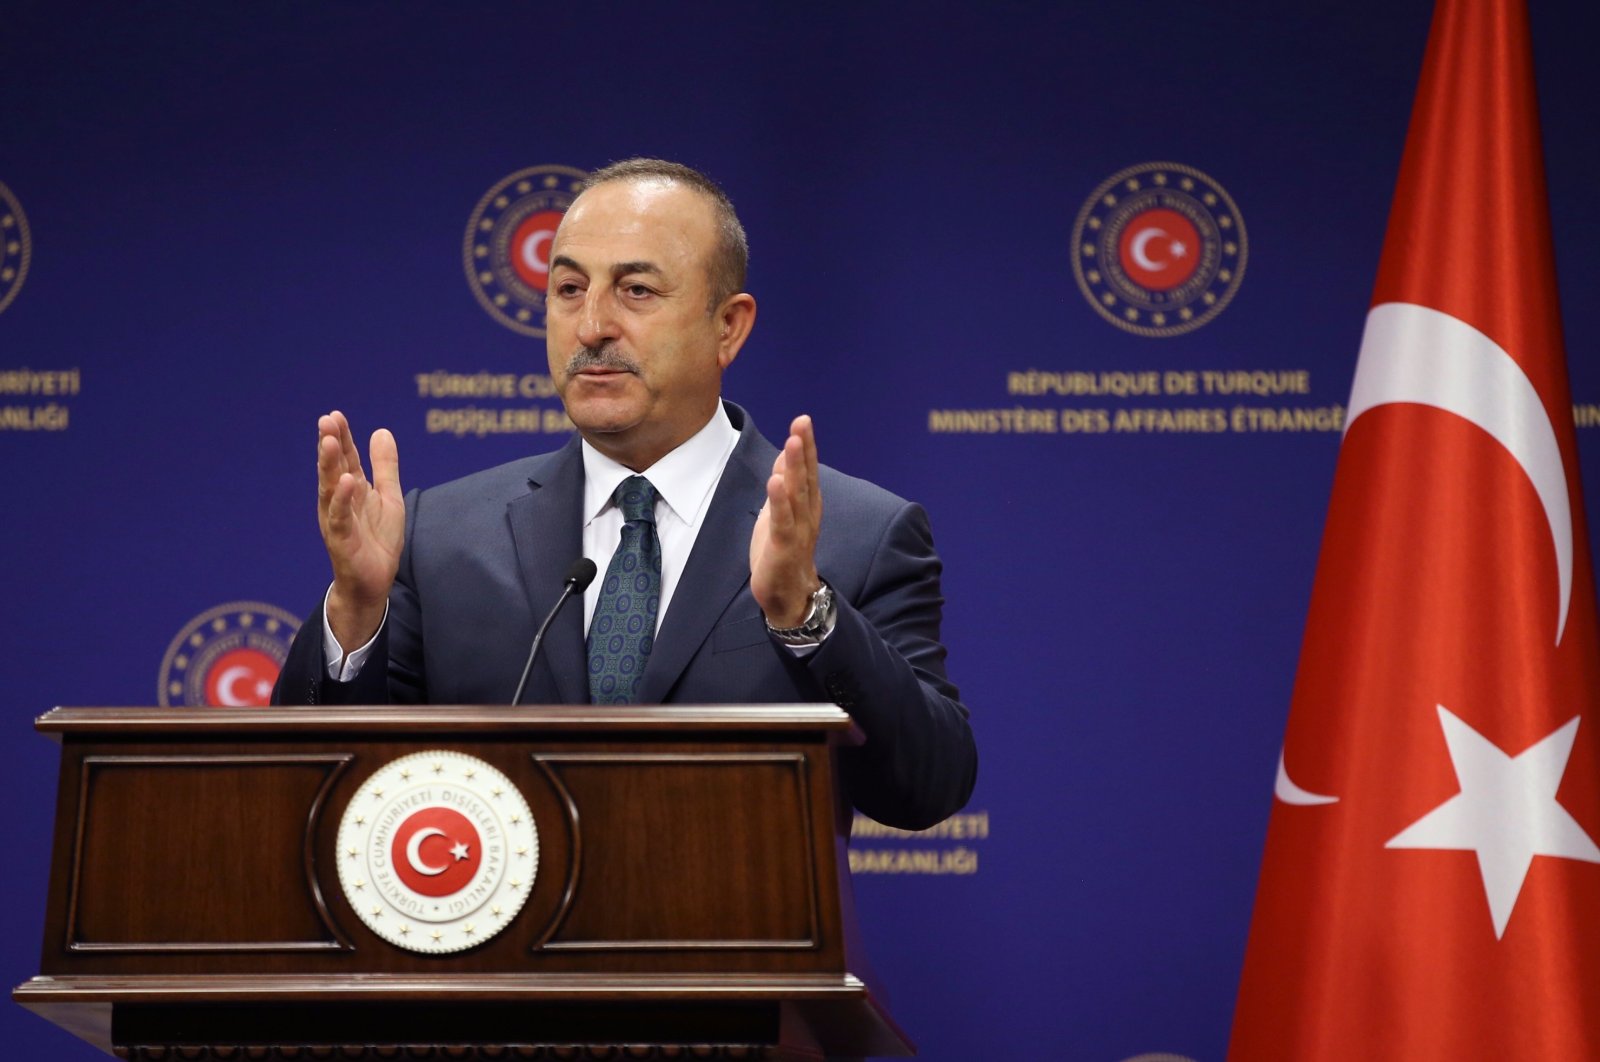 Turkey's Foreign Minister Mevlüt Çavuşoğlu speaks during a joint press conference with Italy's Foreign Minister Luigi Di Maio, Ankara, Turkey, June 19, 2020. (AP File Photo)